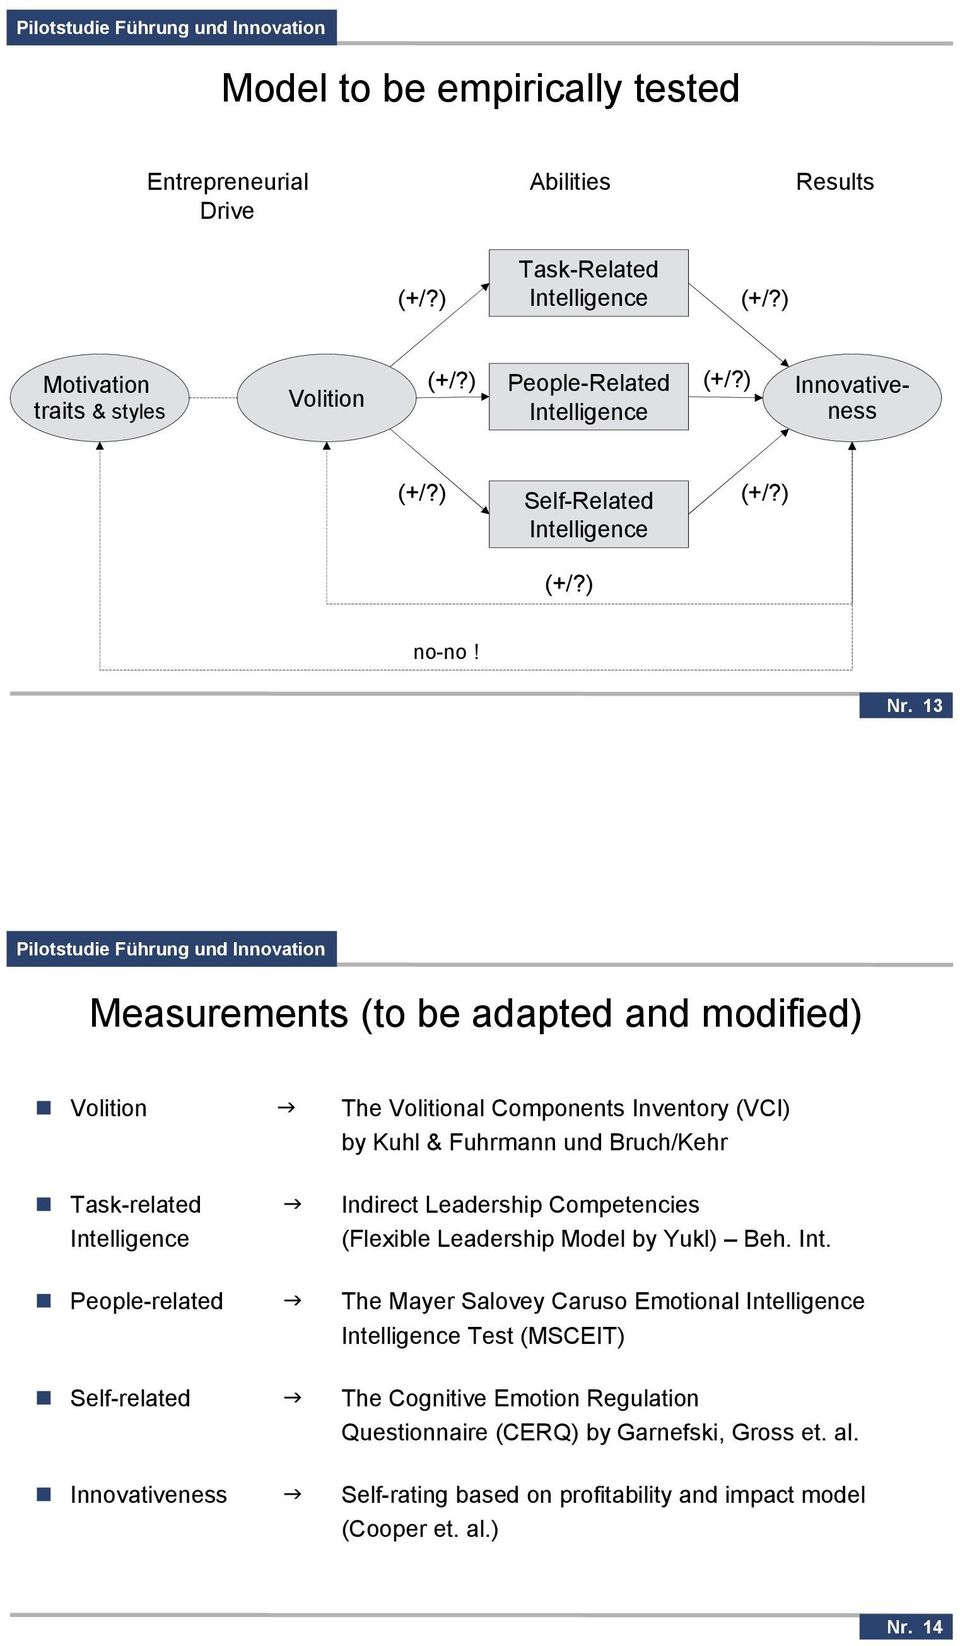 13 Measurements (to be adapted and modified) Volition The Volitional Components Inventory (VCI) by Kuhl & Fuhrmann und Bruch/Kehr Task-related Indirect